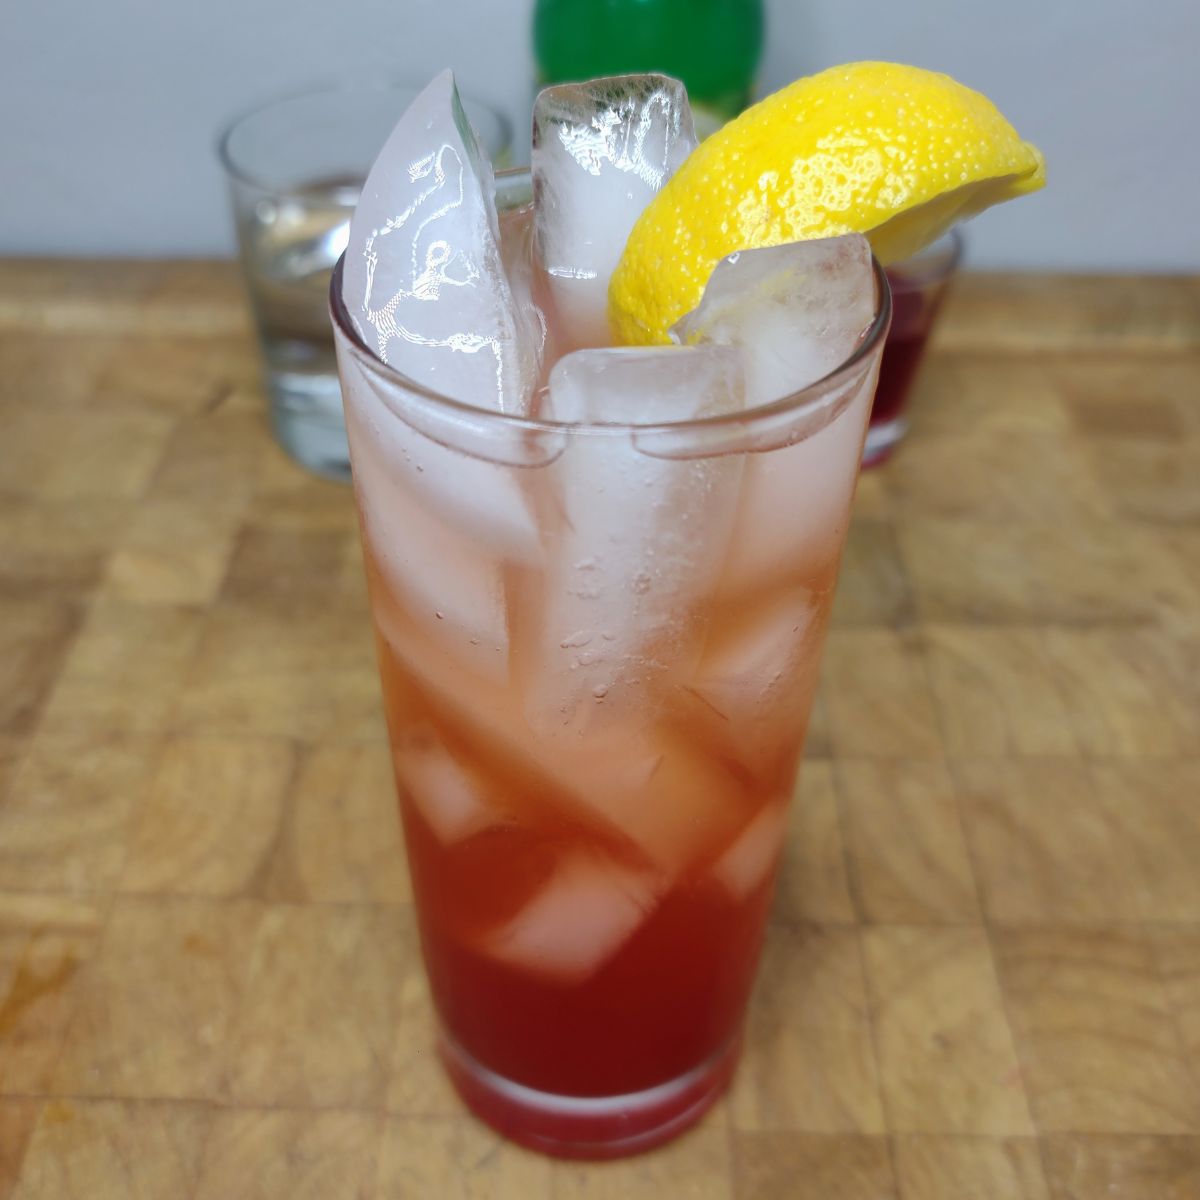 Strawberry Lemonade with a lemon wedge on the glass and ingredients in the background.